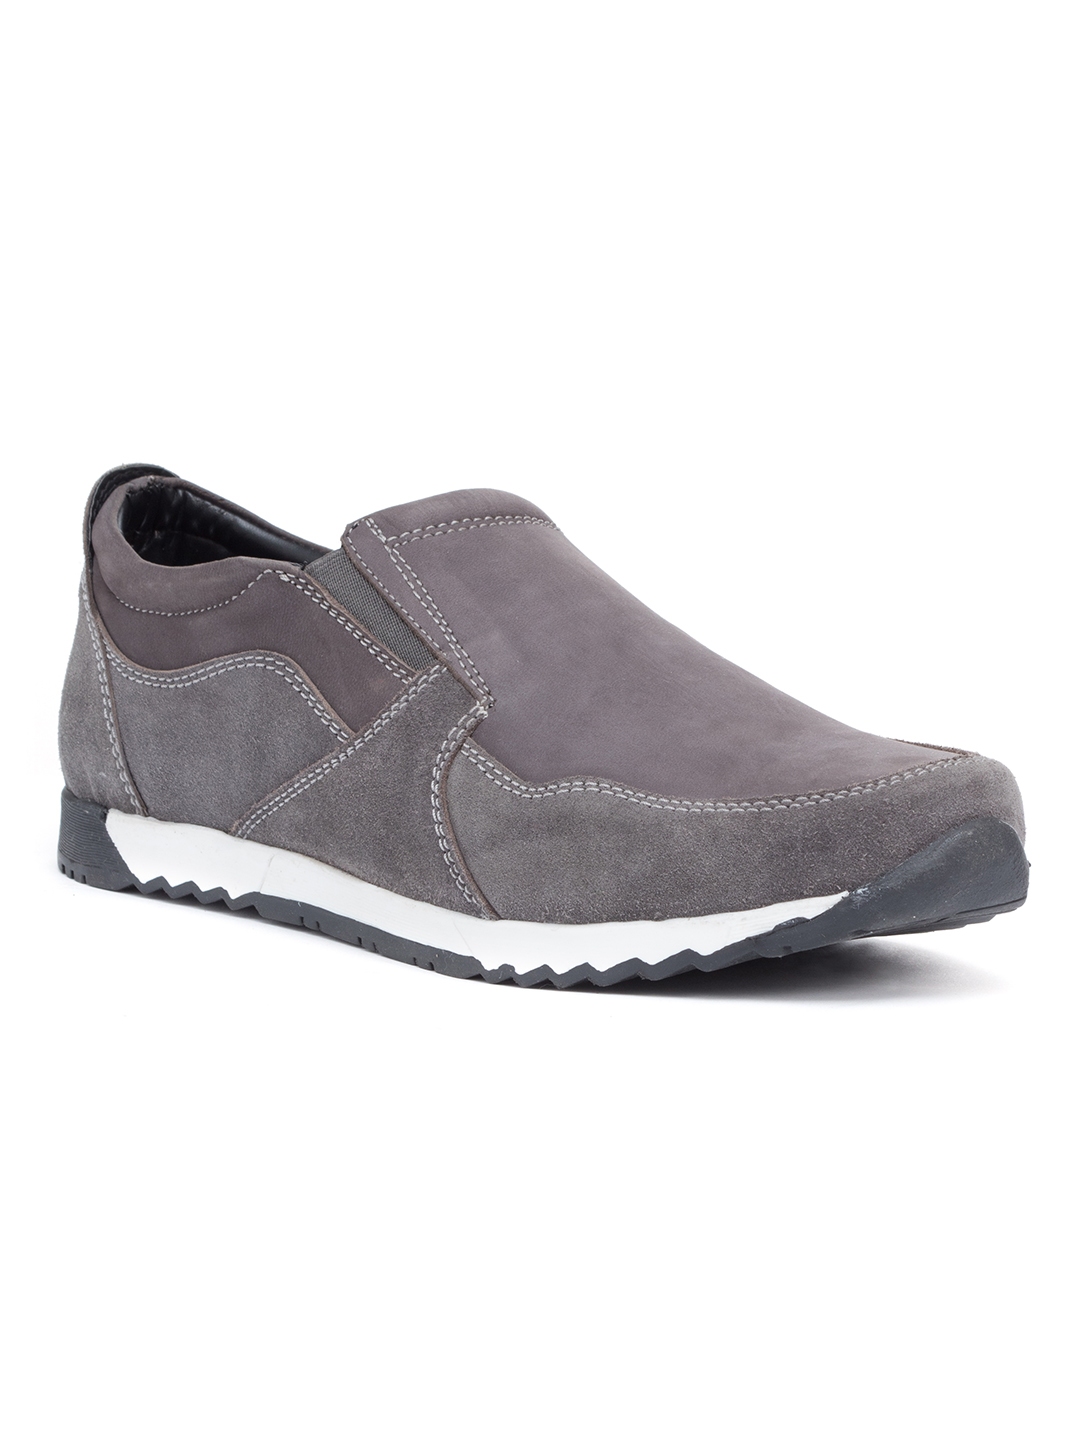 Buy Bata Men Taupe Leather Slip On Sneakers - Casual Shoes for Men ...